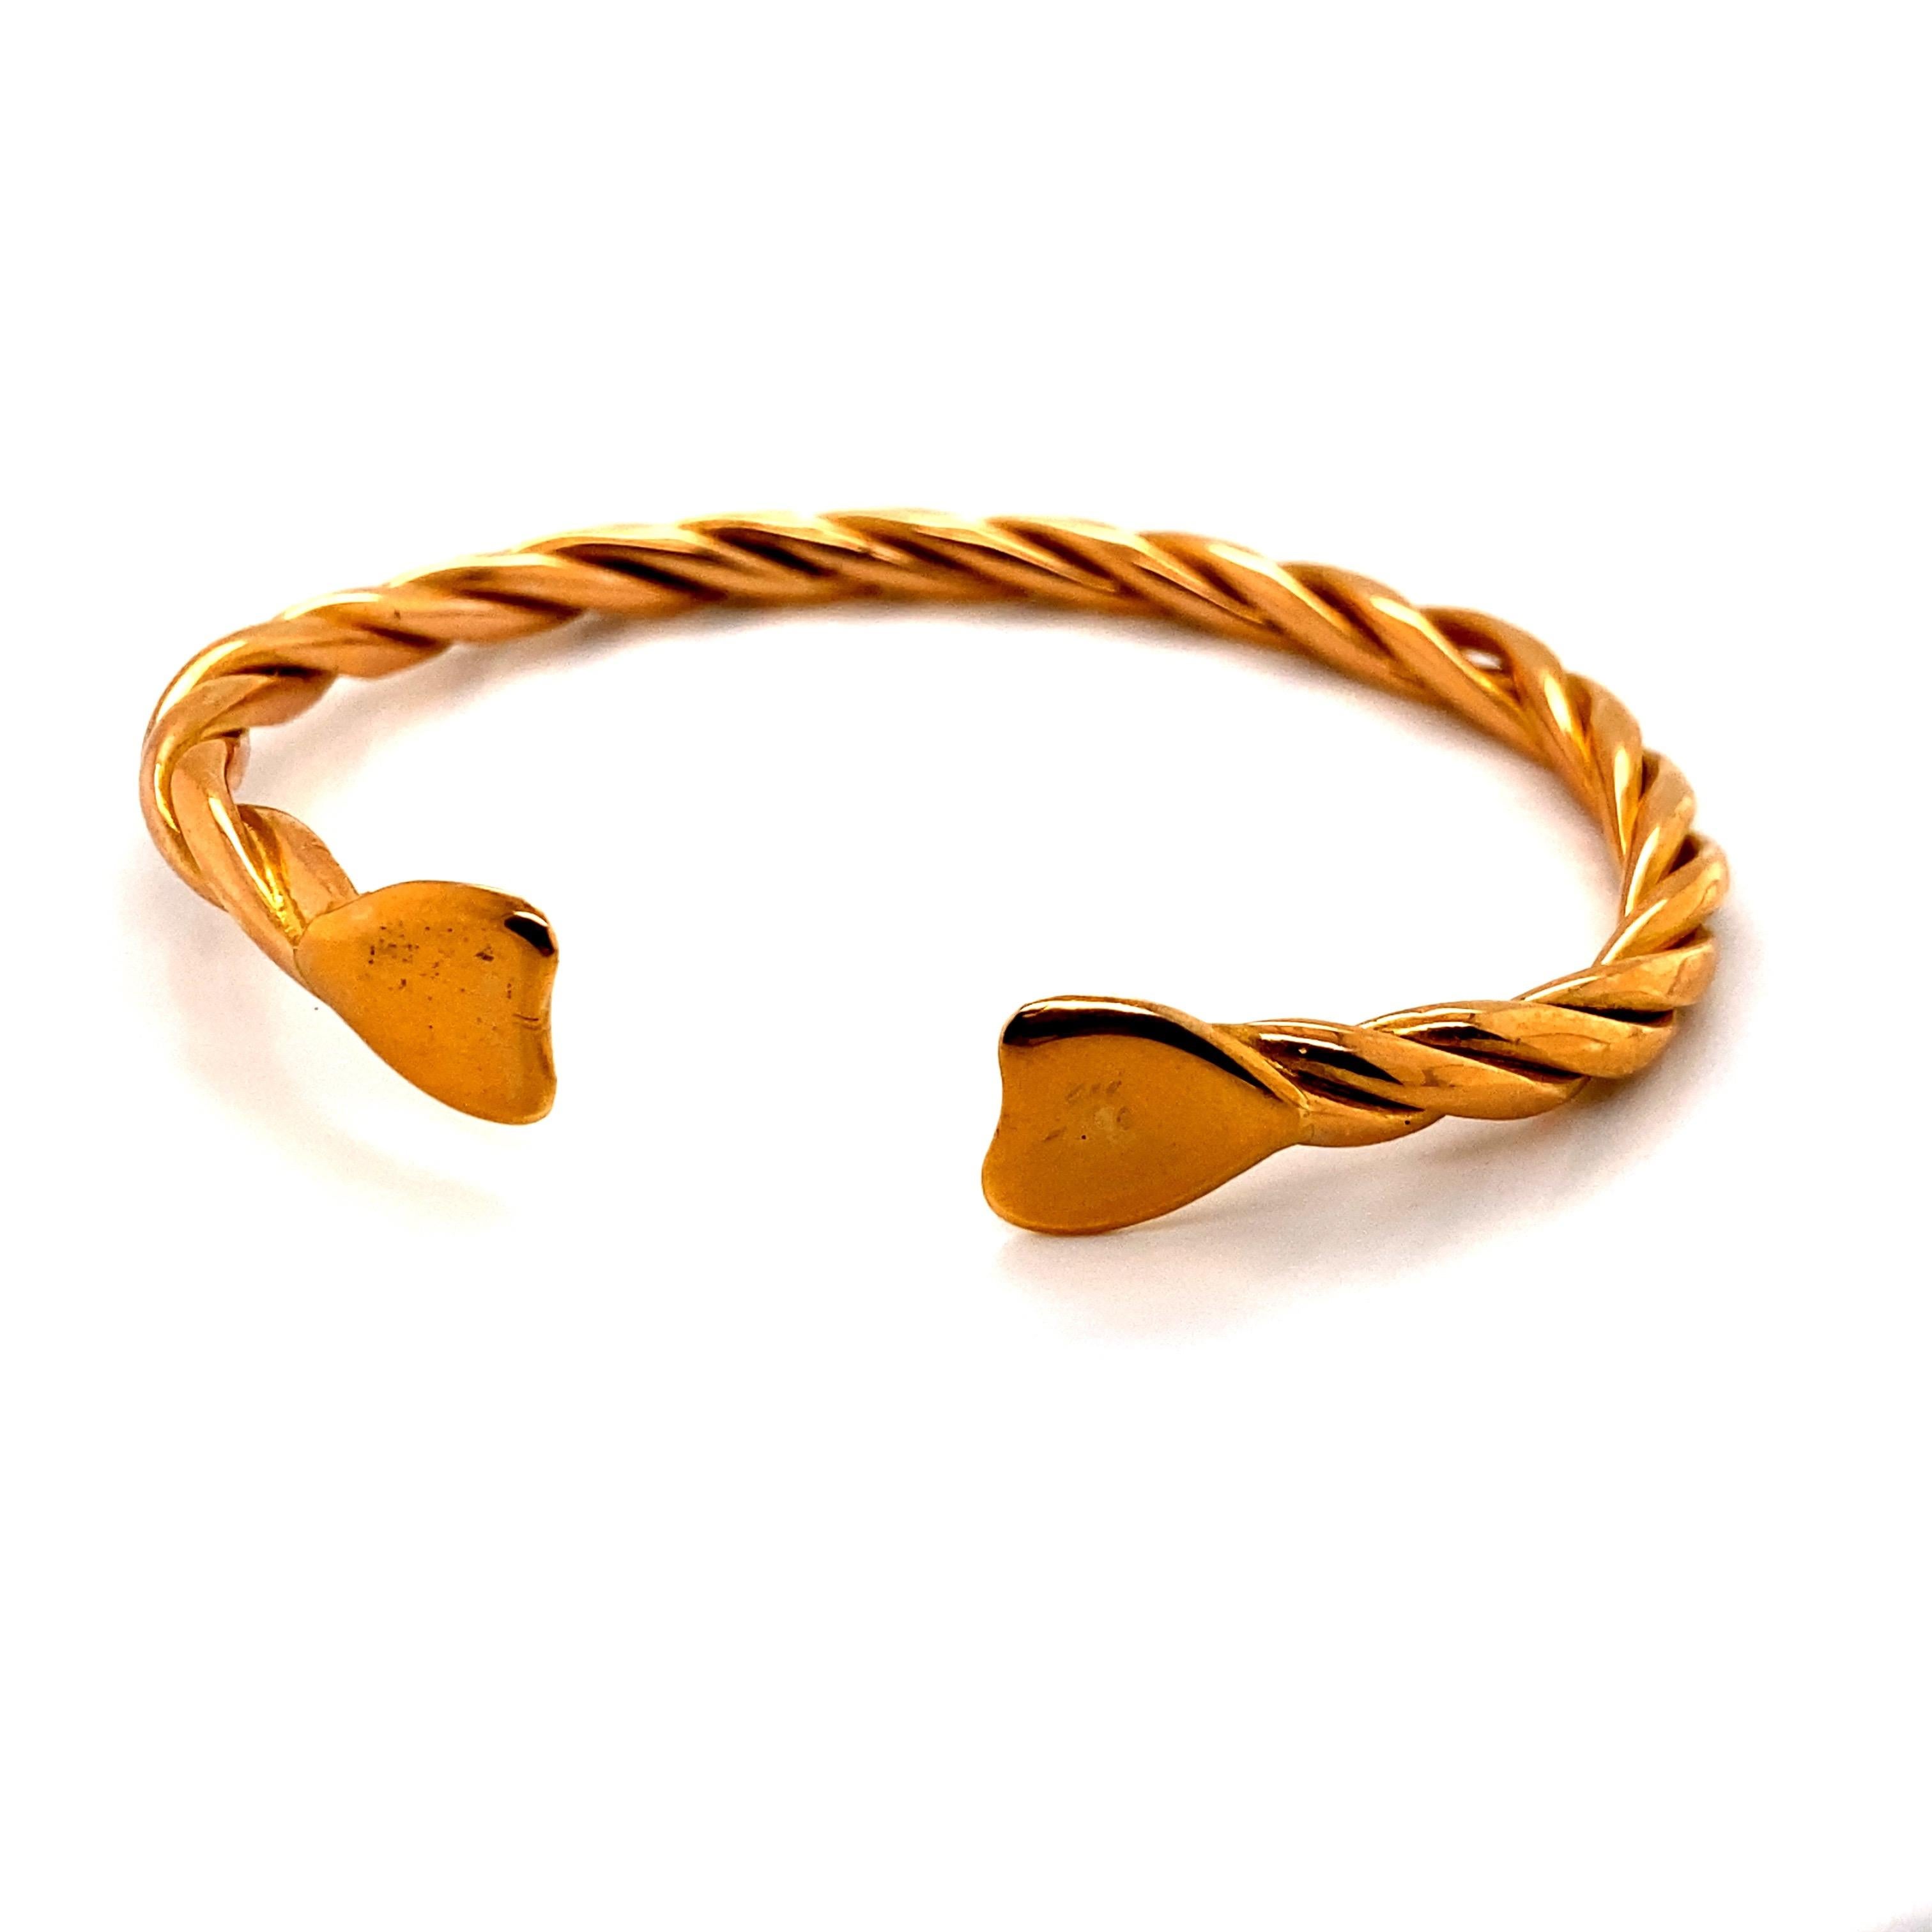 20K Yellow Gold Twist Cable Cuff Bangle Bracelet - The width of the cable is 5mm. The inside diameter is 2.25 inches high and 2.5 inches wide. The bangle weighs 42.13 grams.